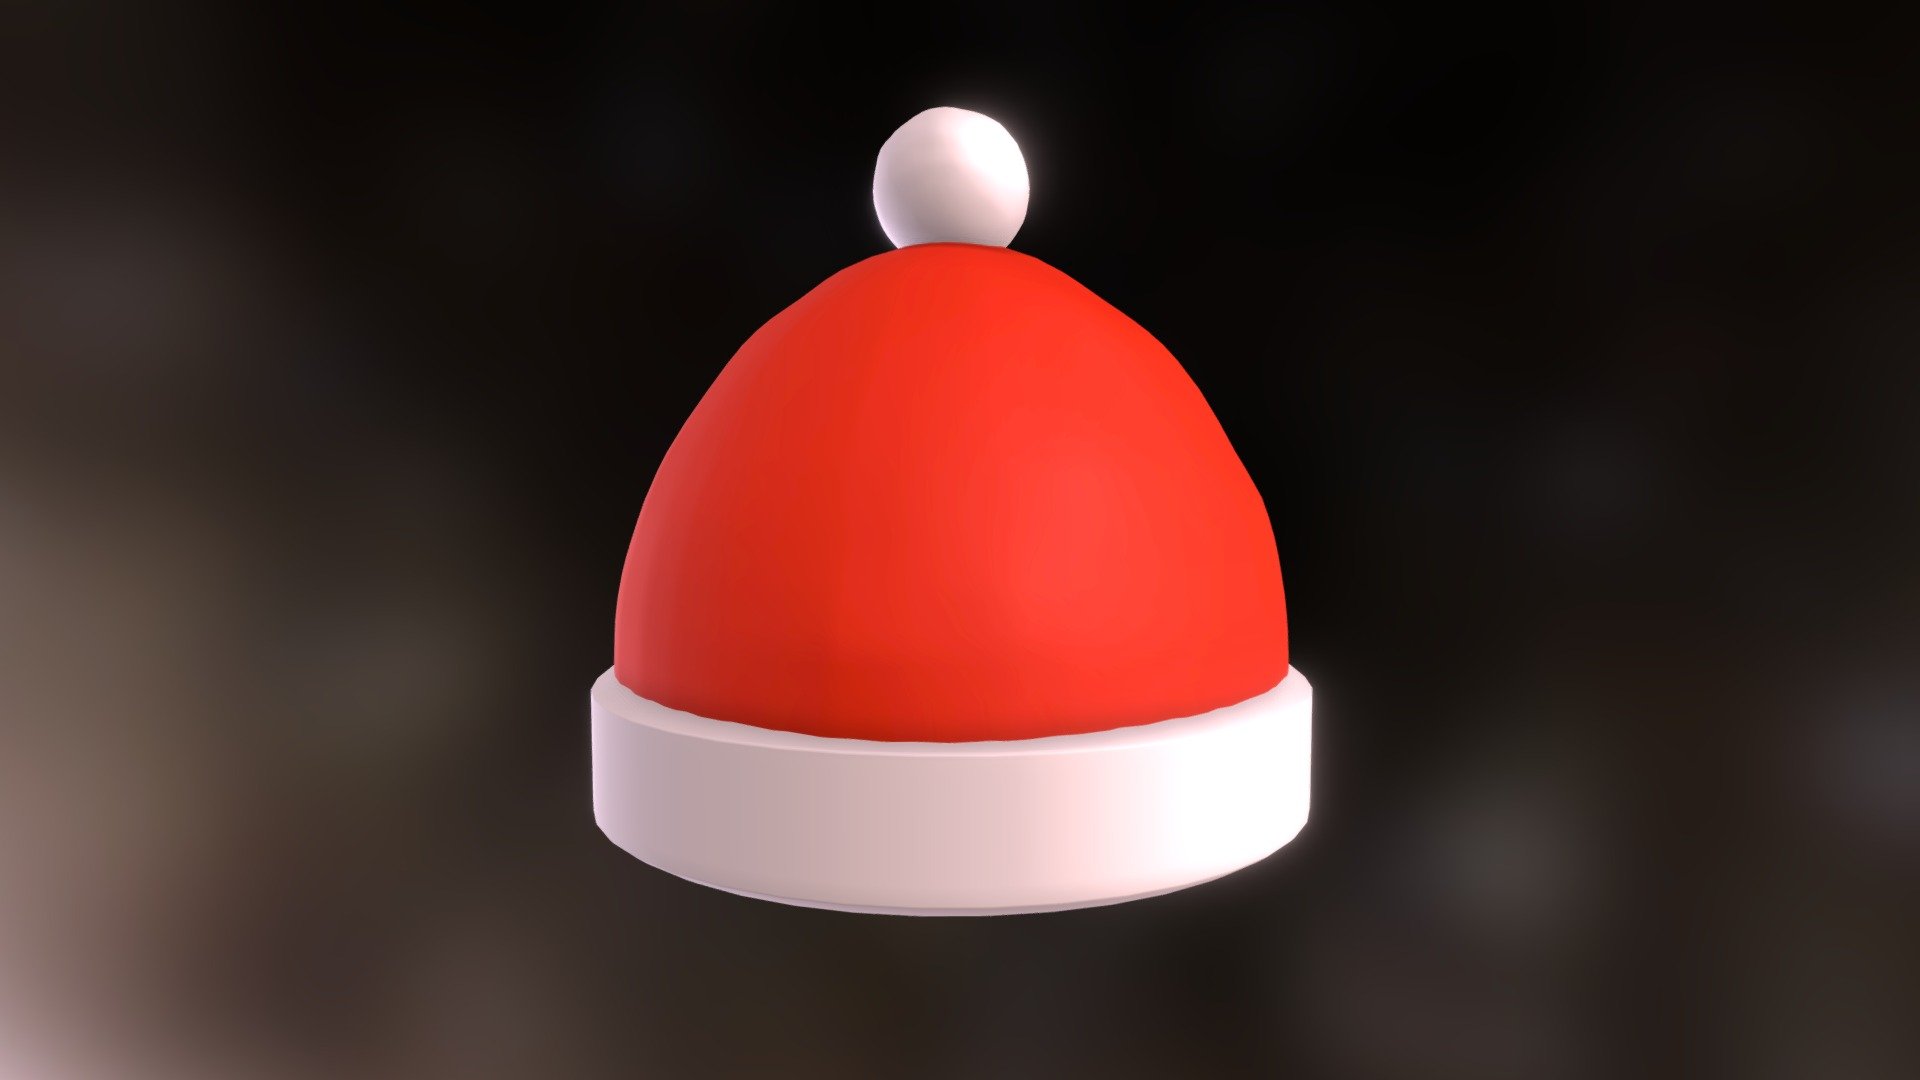 Cartoon Hat For Christmas Ready to use.

Click on the link to see more models : https://sketchfab.com/GbehnamG/store

If you need customized 3d models , feel free to contact at: mr.gbehnamg@yahoo.com - Cartoon Hat Christmas - Buy Royalty Free 3D model by BehNaM (@GbehnamG) 3d model